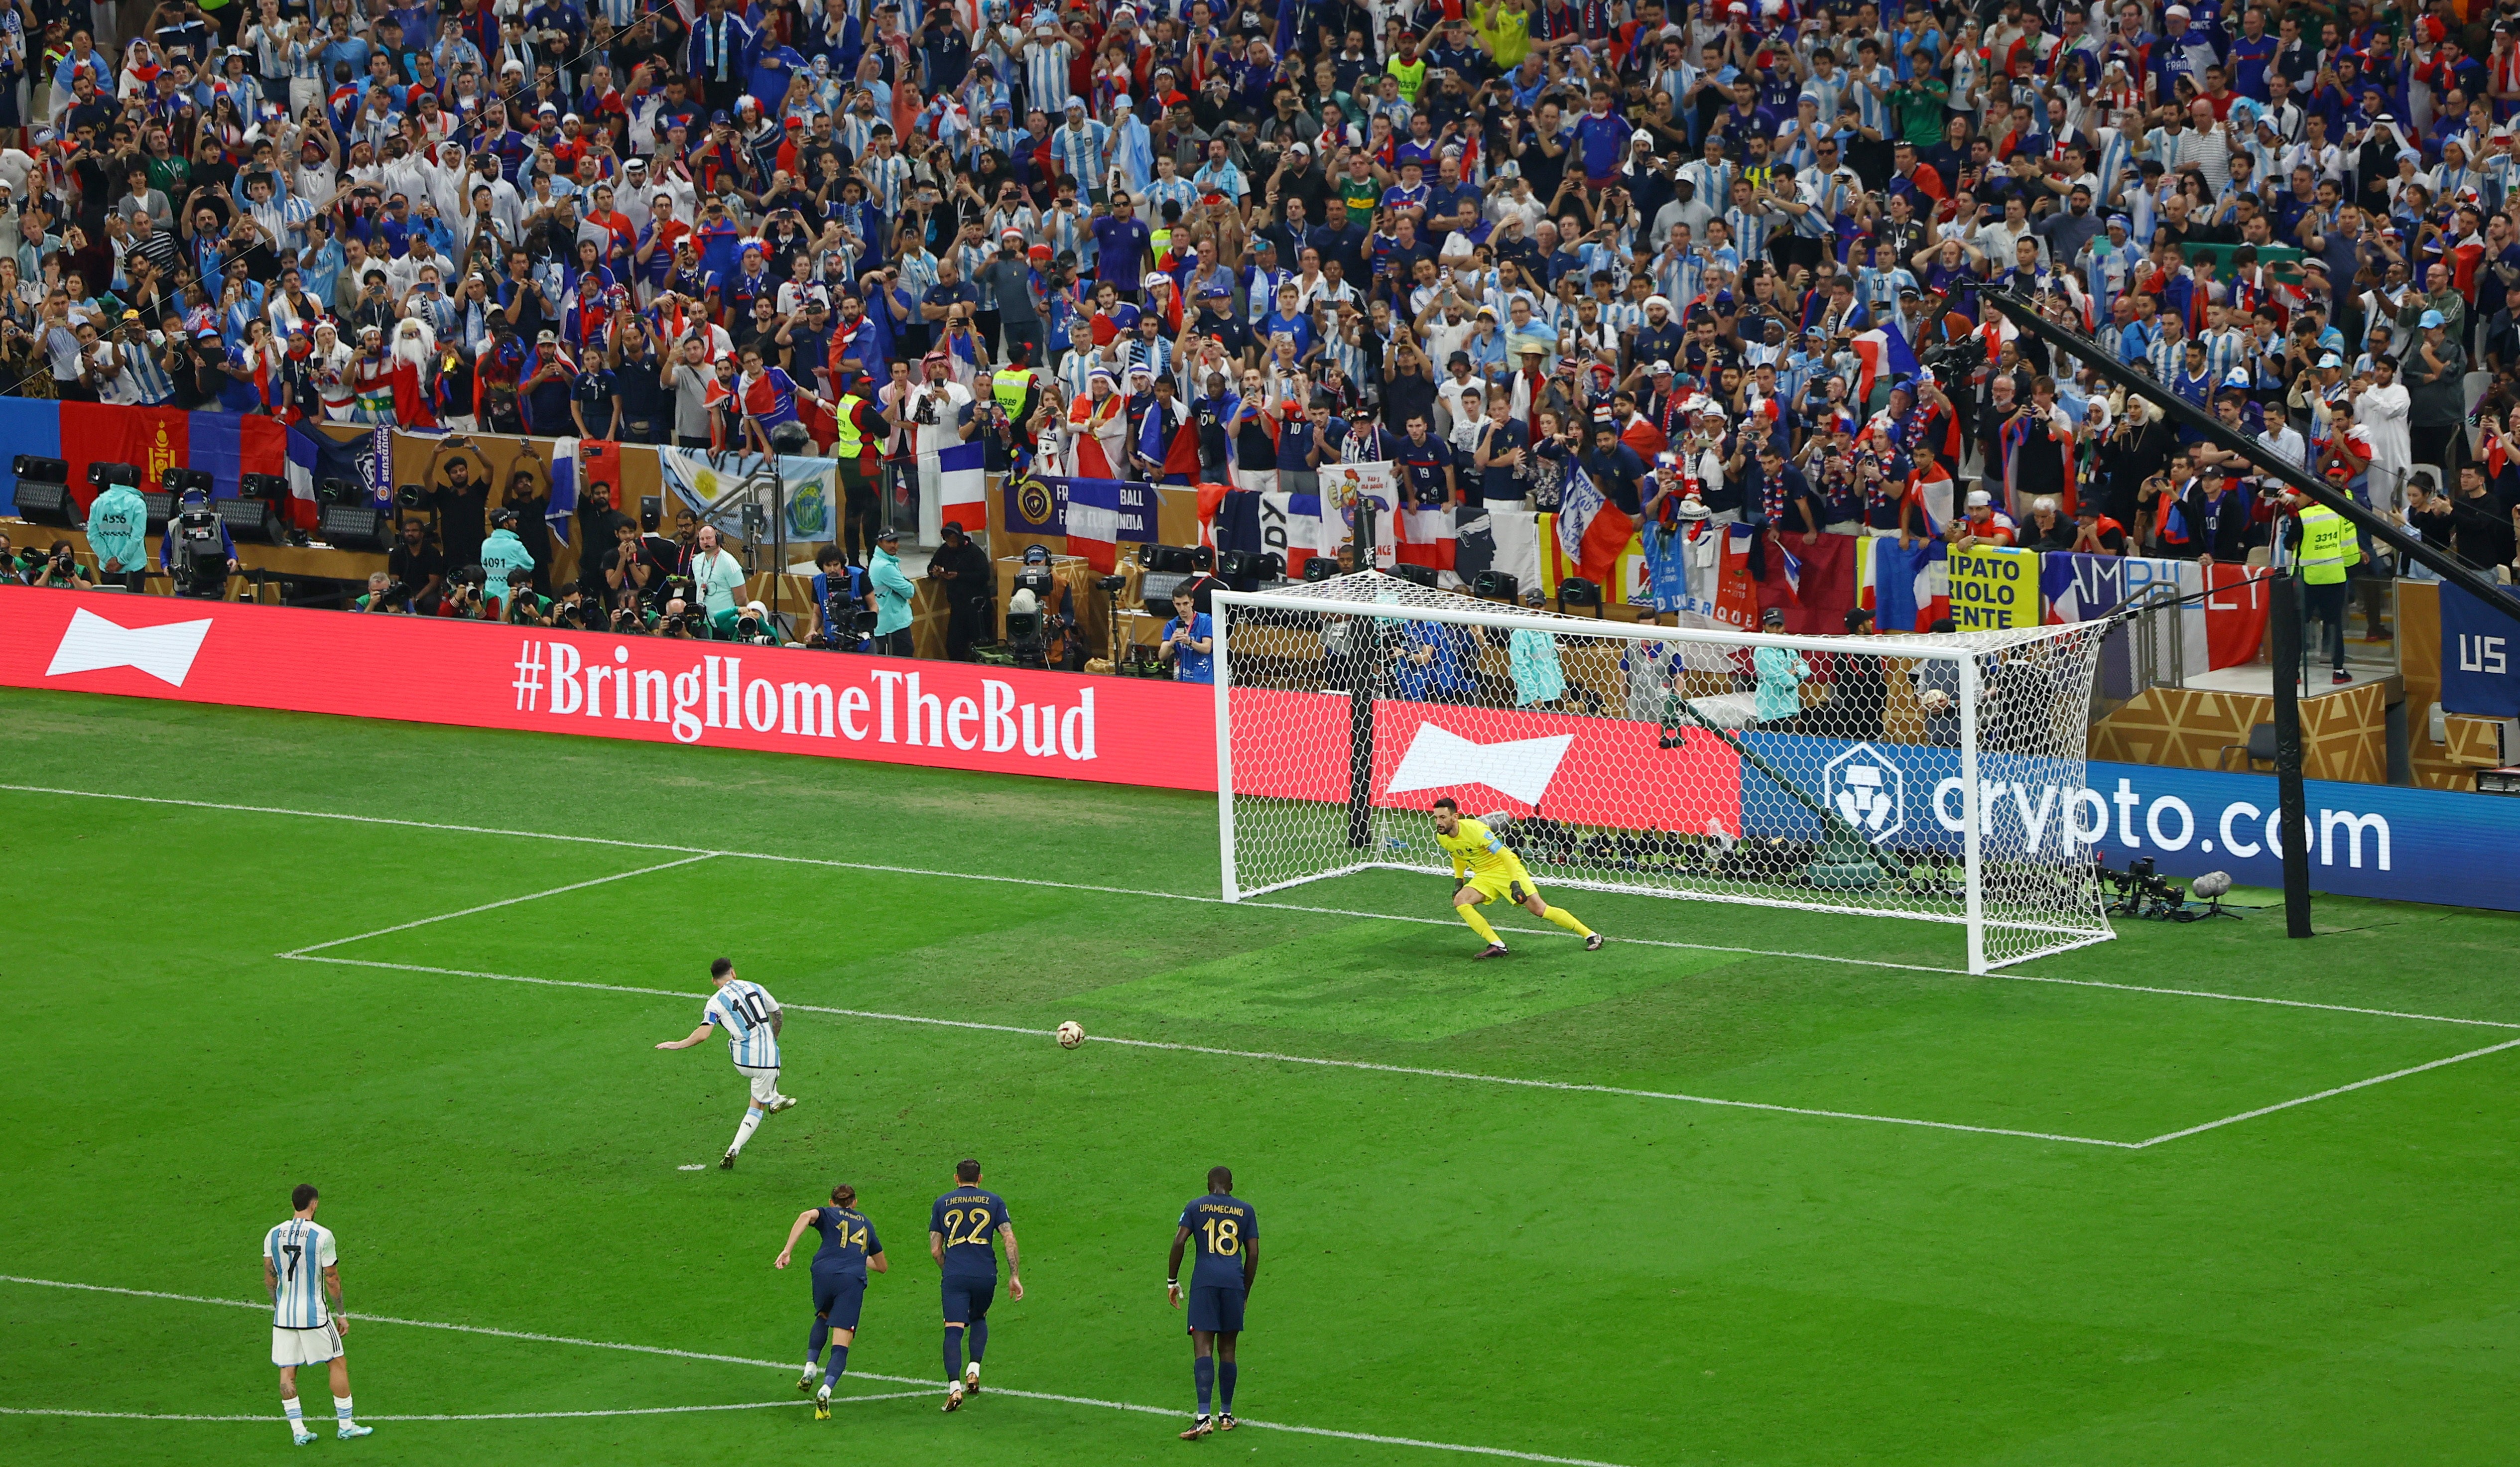 Messi scores the first goal from the penalty spot